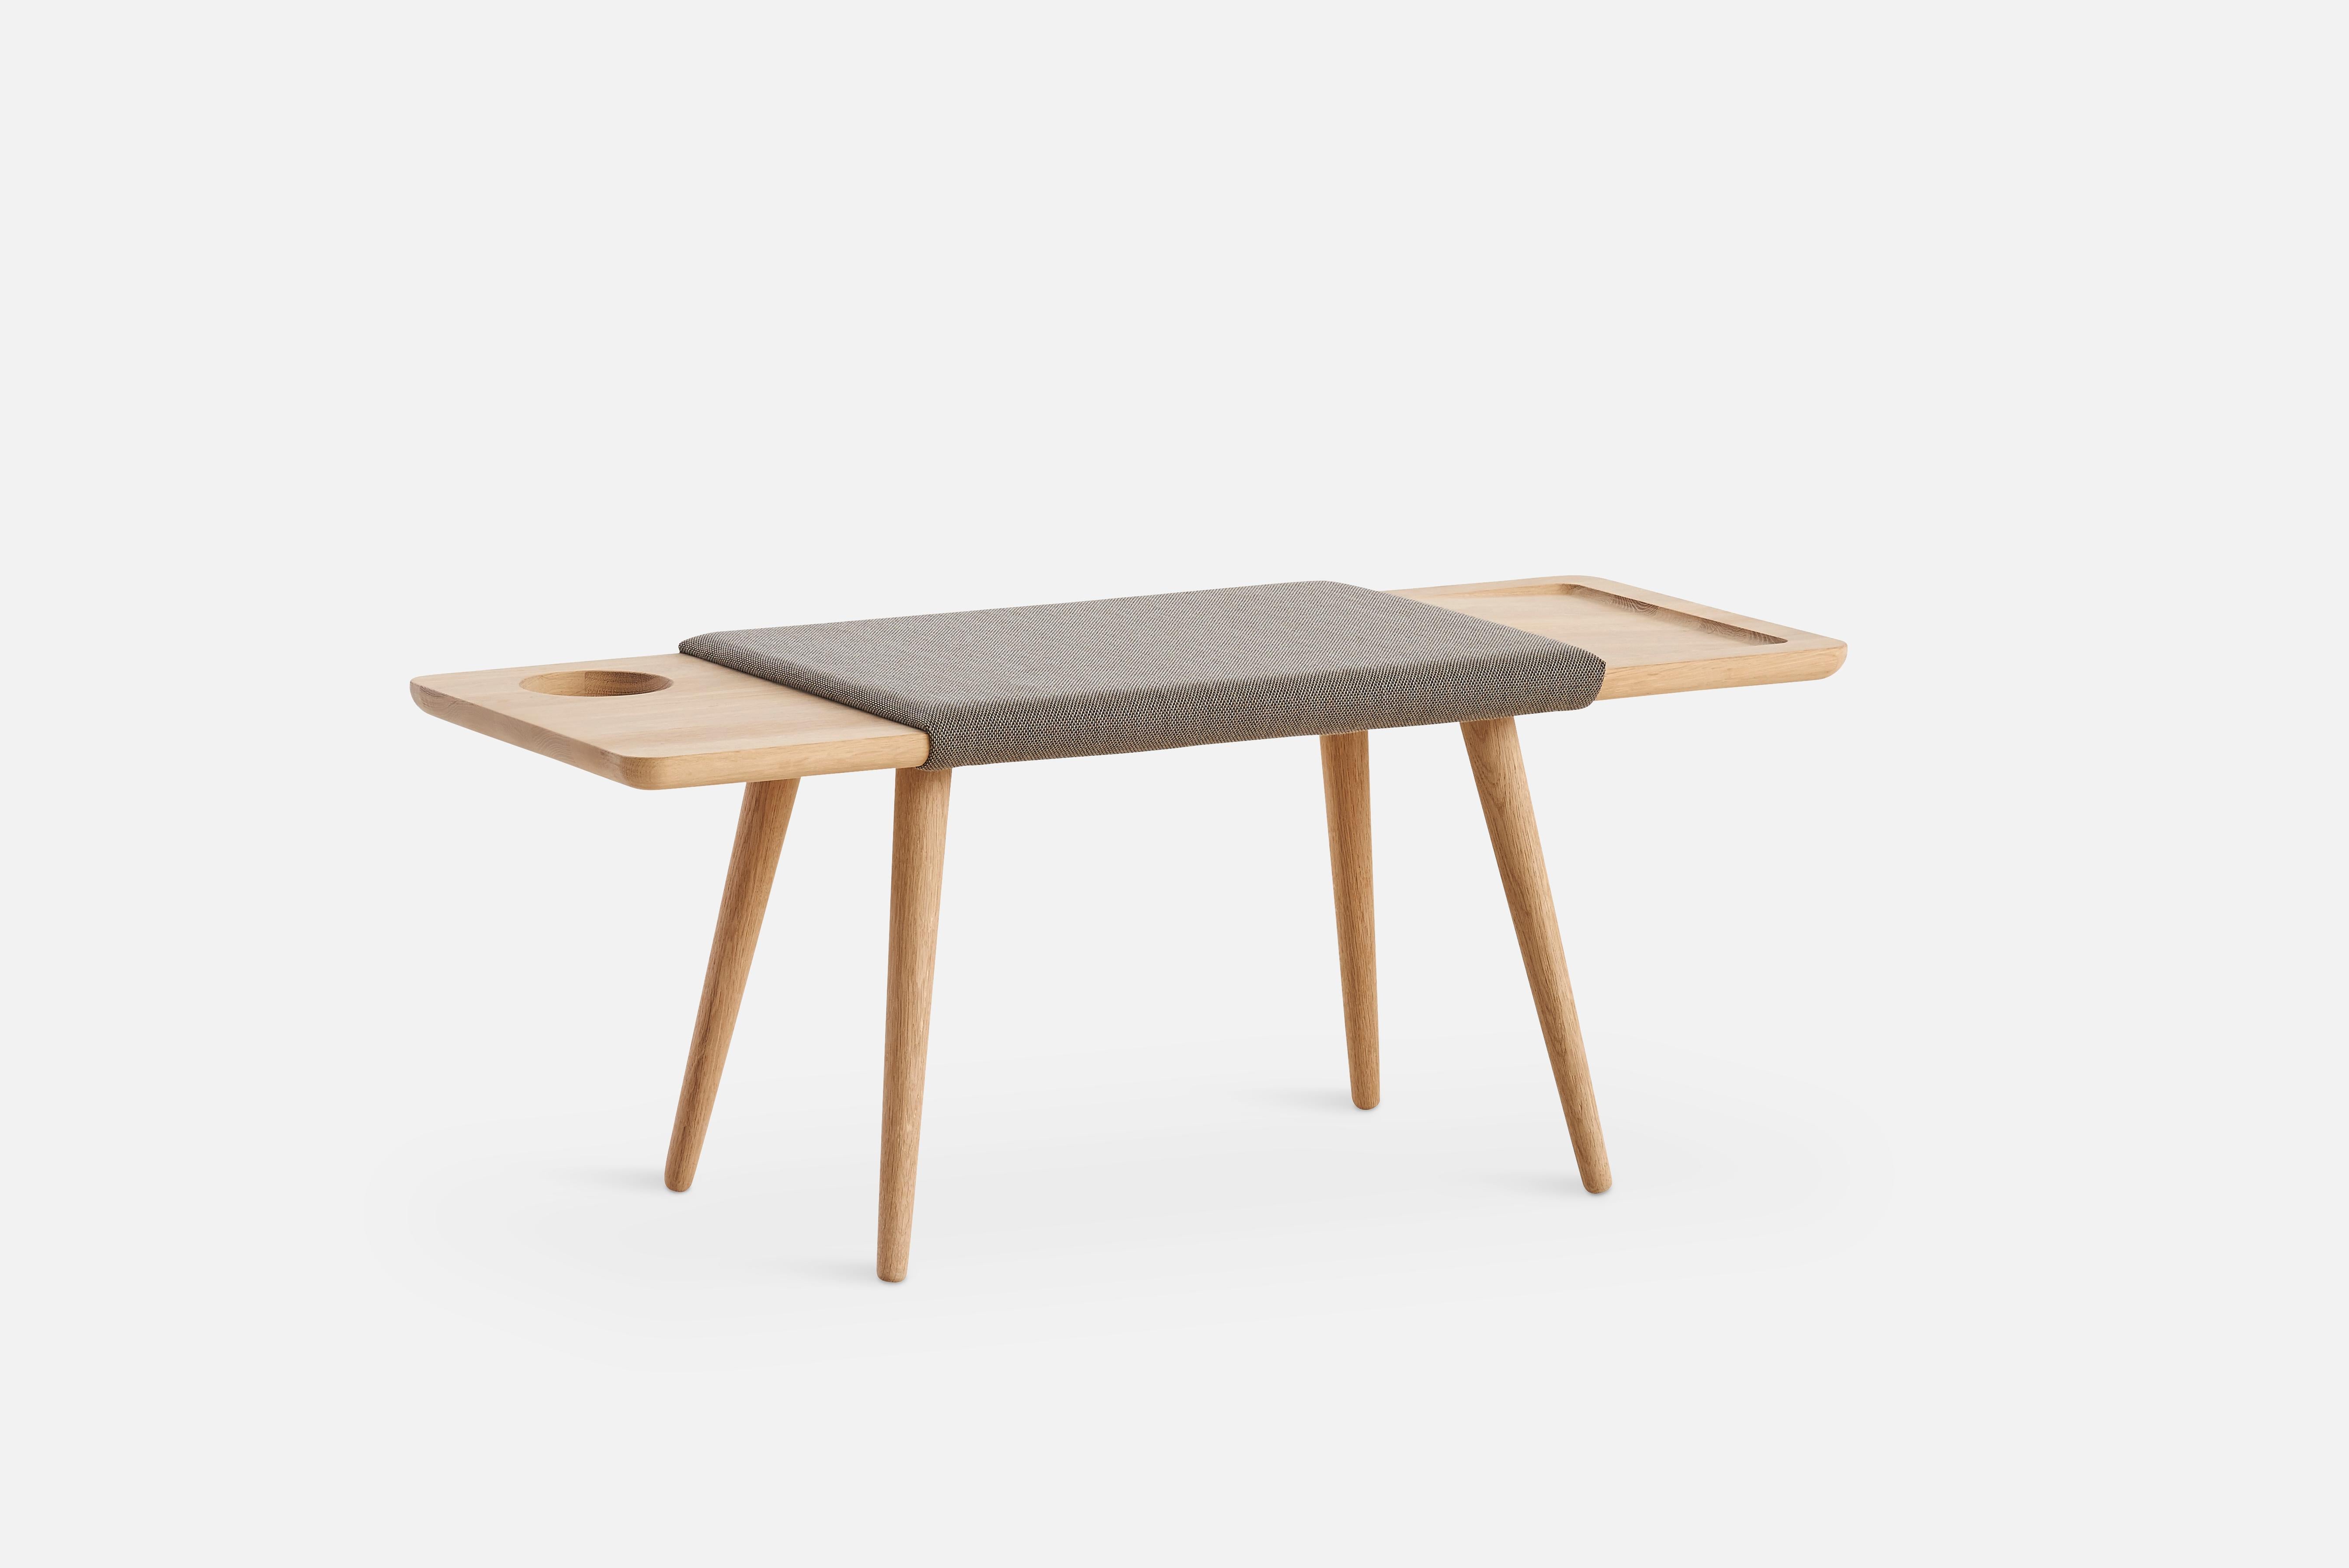 Baenk Bench by Nur Design.
Materials: Solid Oak and Upholstery.
Dimensions: D 42.5 x W 110 x H 45 cm.

The founders, Mia and Torben Koed, decided to put their 30 years of experience into a new project. It was time for a change and a new